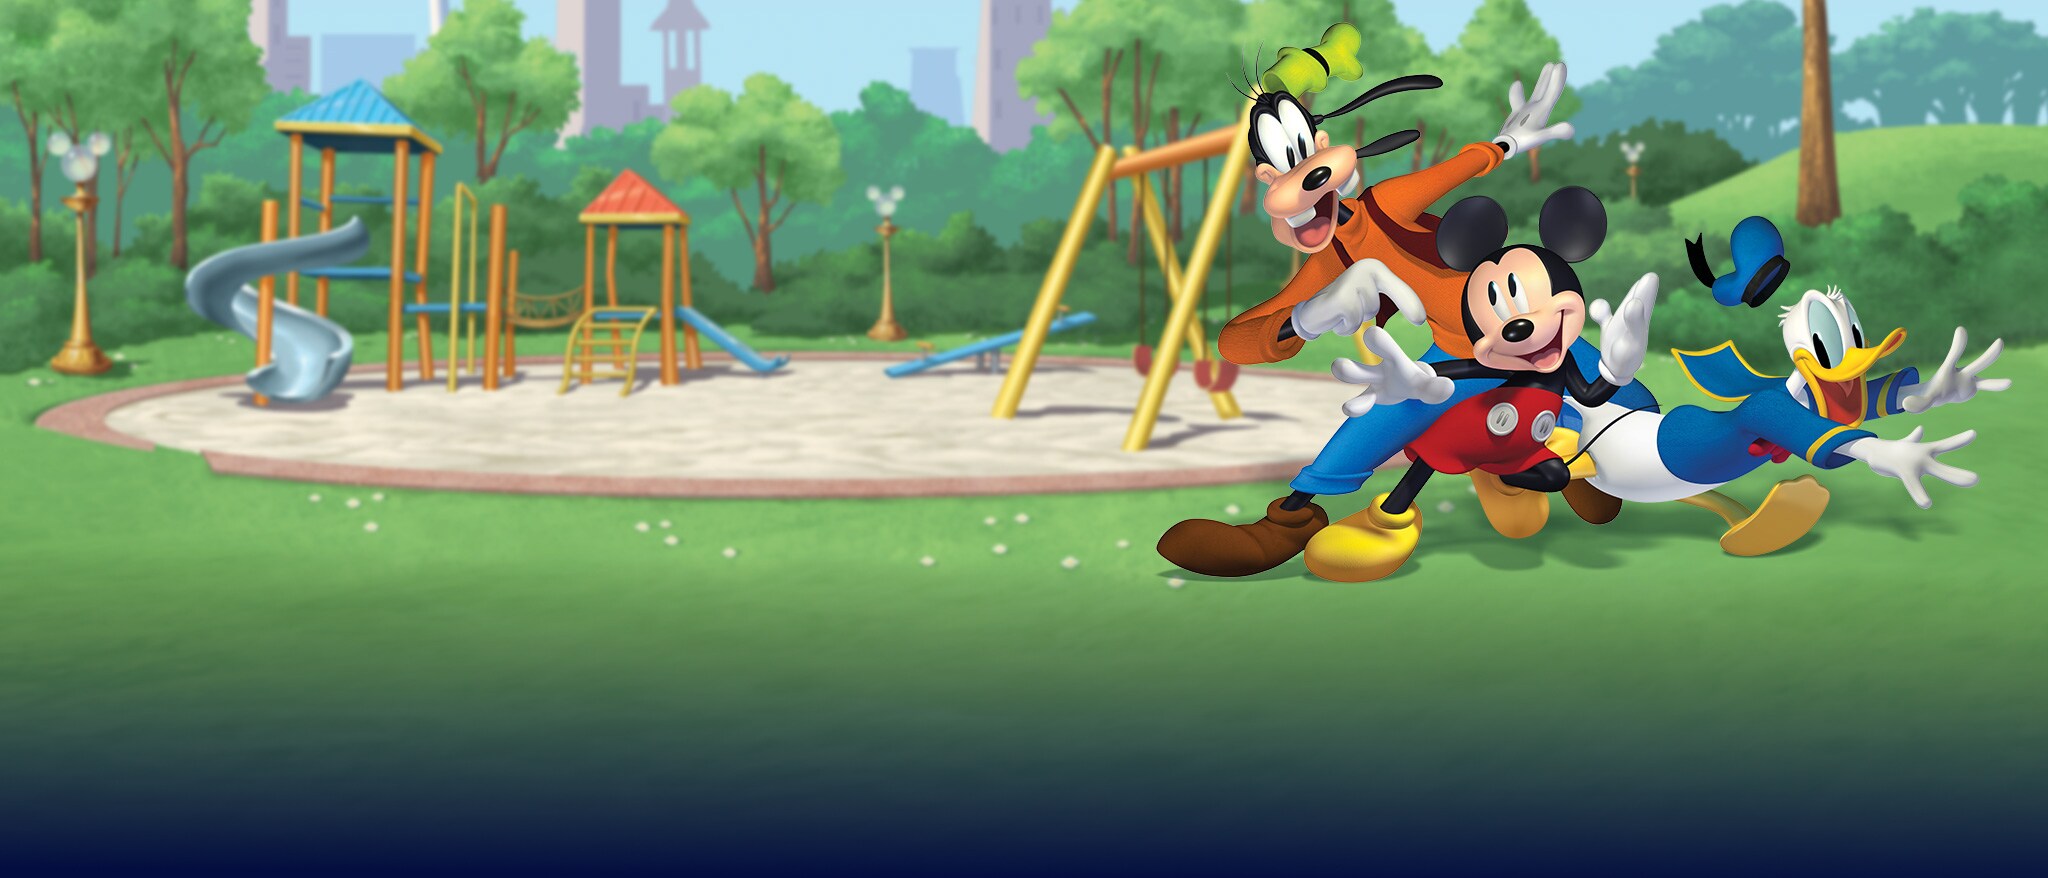 Mickey Mouse Mixed-Up Adventures - Featured Content Banner